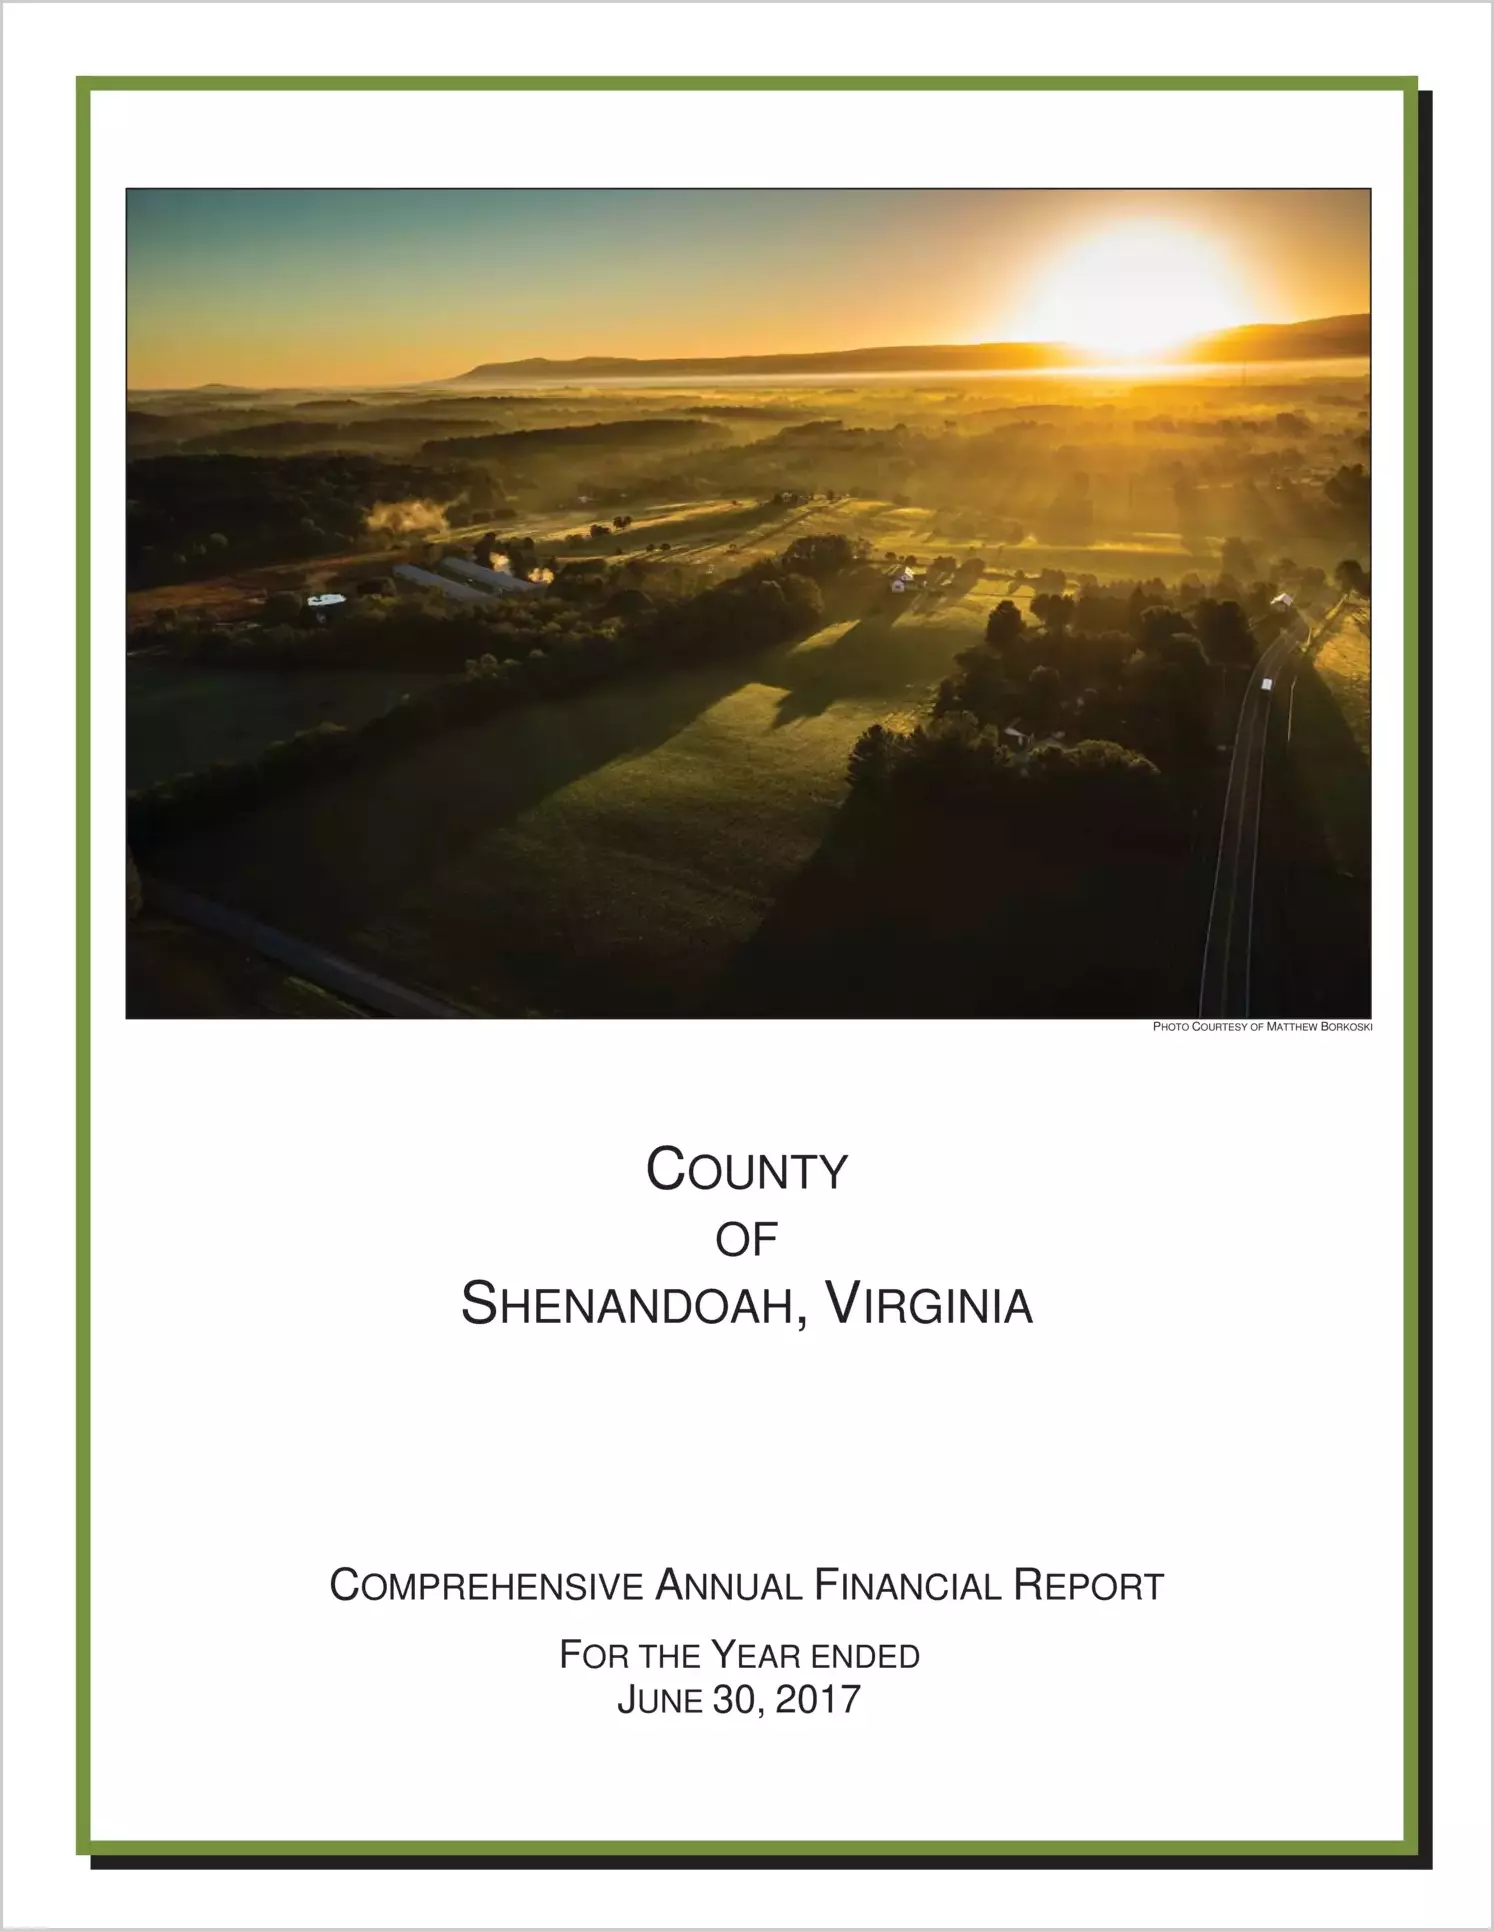 2017 Annual Financial Report for County of Shenandoah